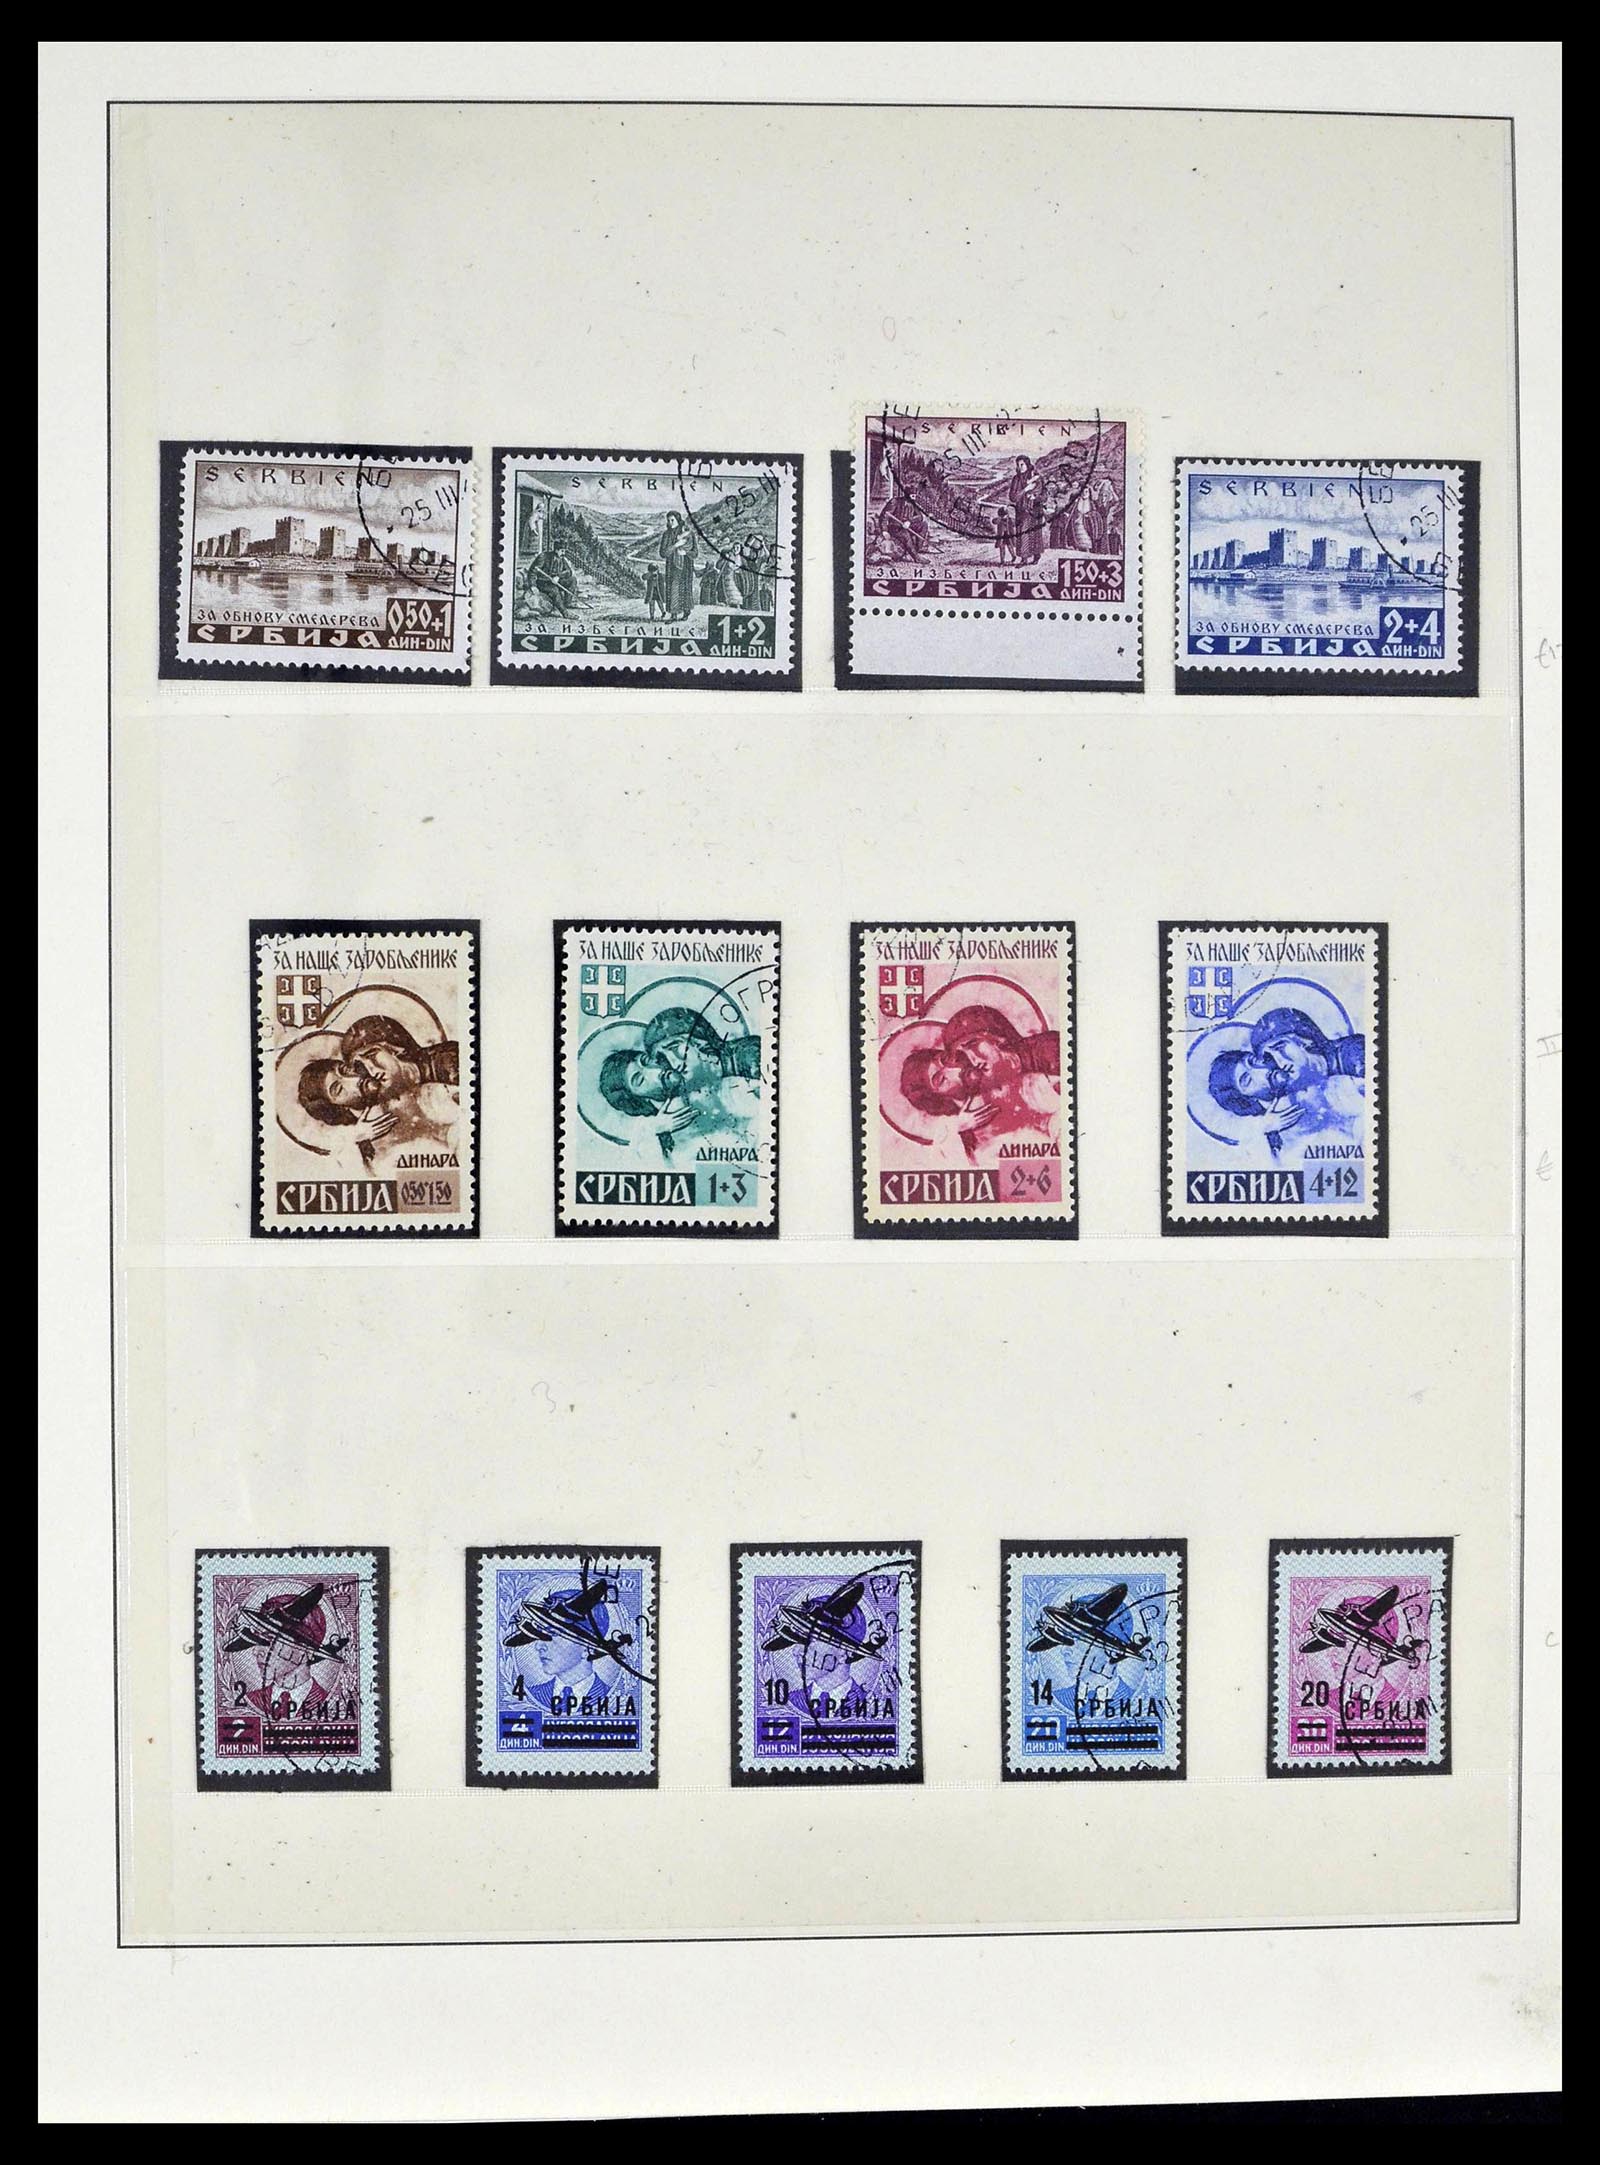 39396 0014 - Stamp collection 39396 German occupation WW II 1939-1945.